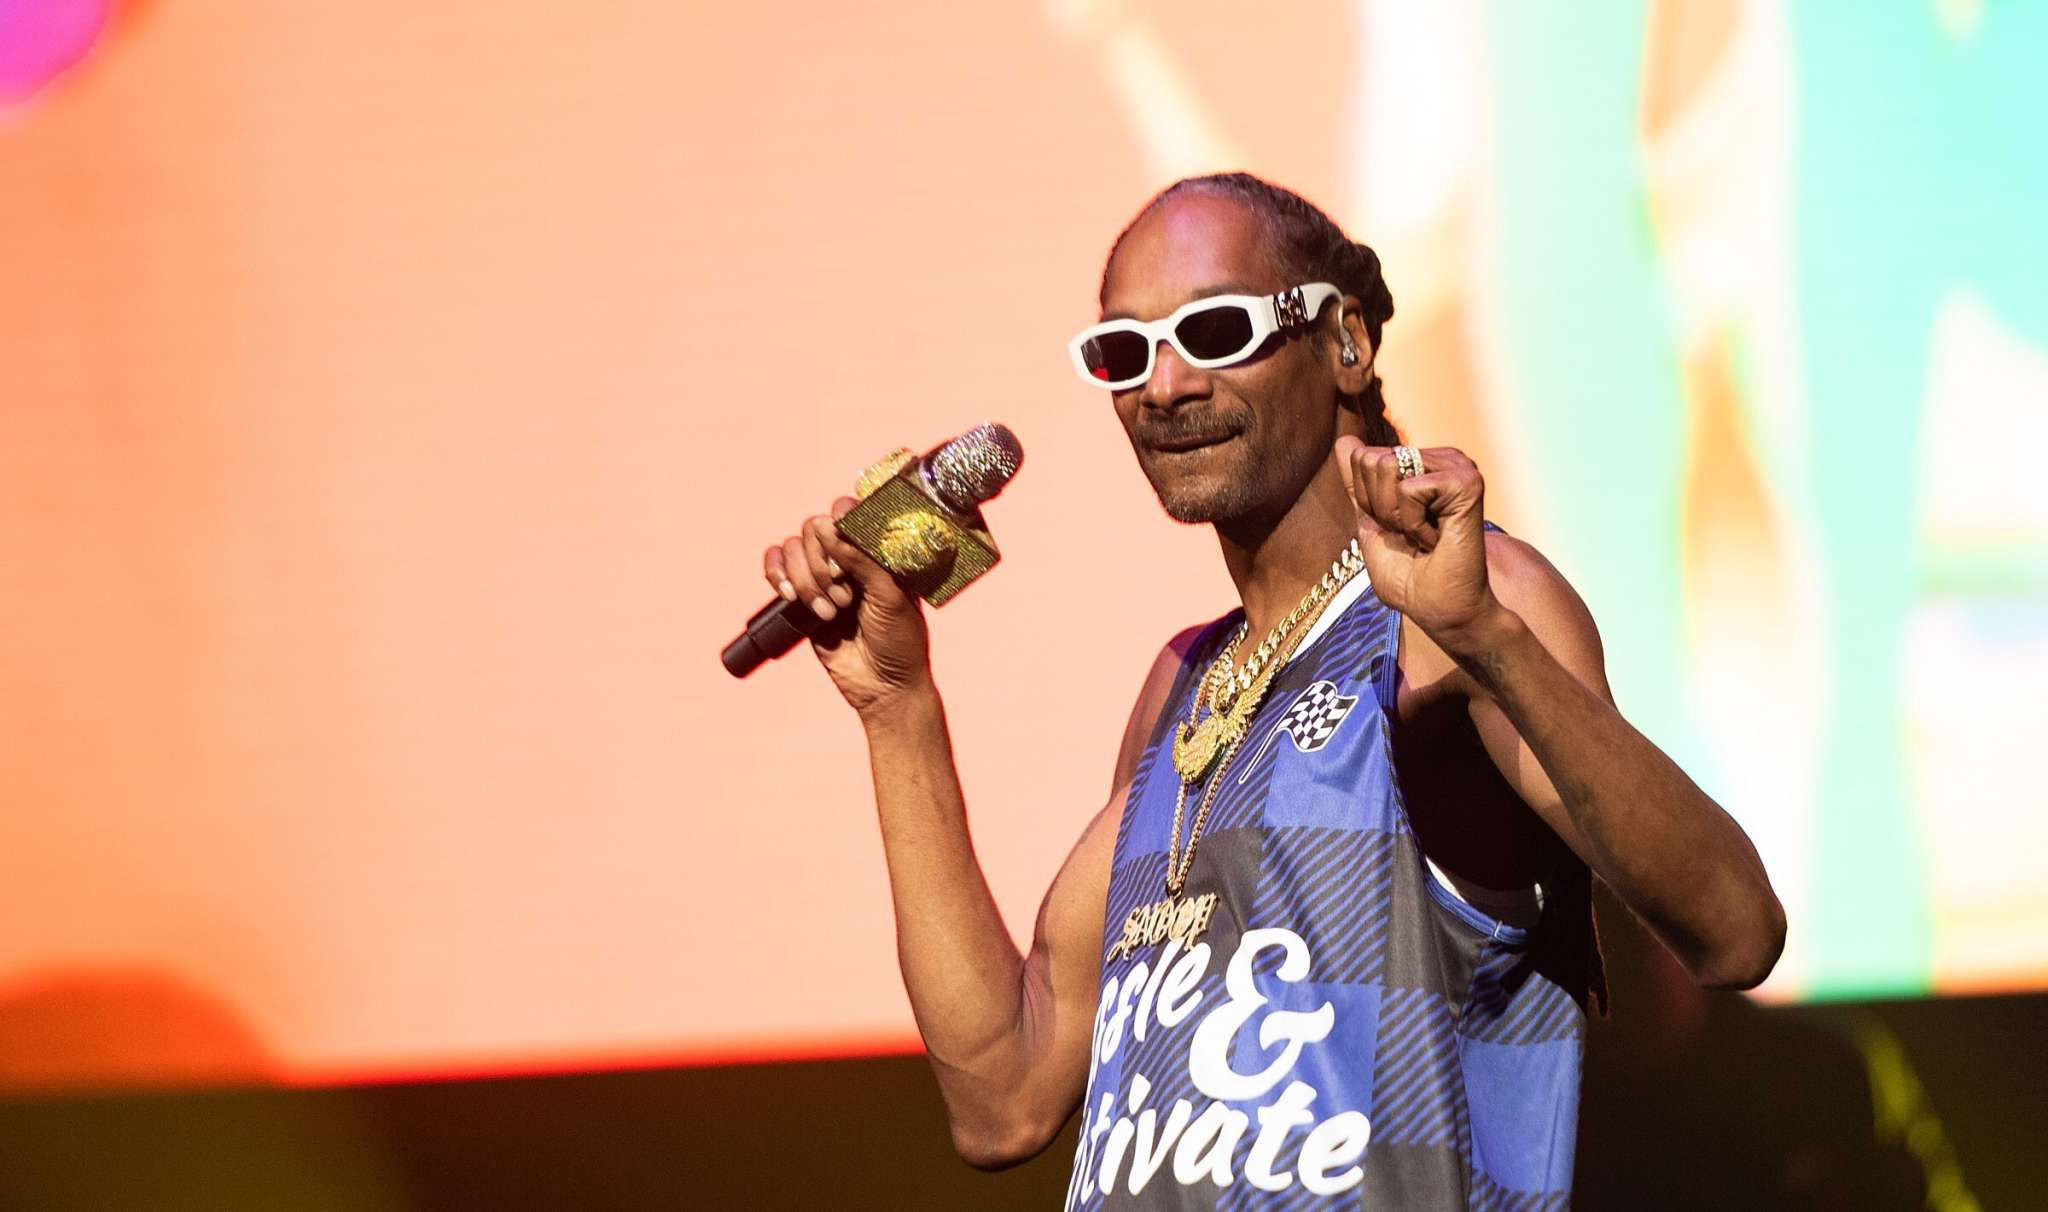 snoop-dogg-speaks-following-tragic-events-involving-drakeo-the-ruler